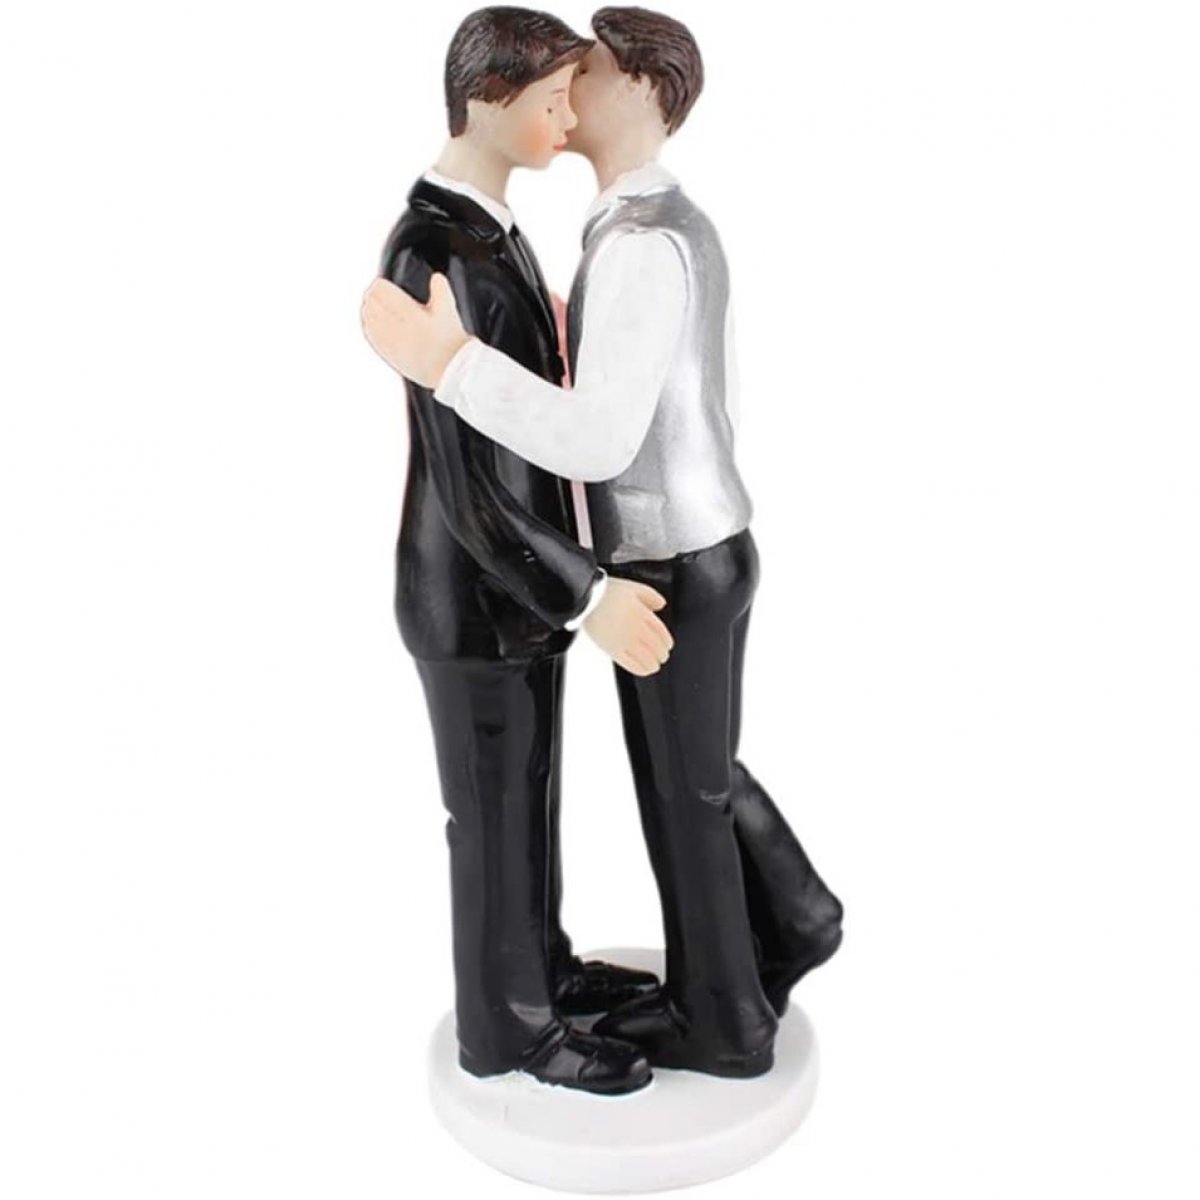 Figurine mariage couple hommes gay 15 cm